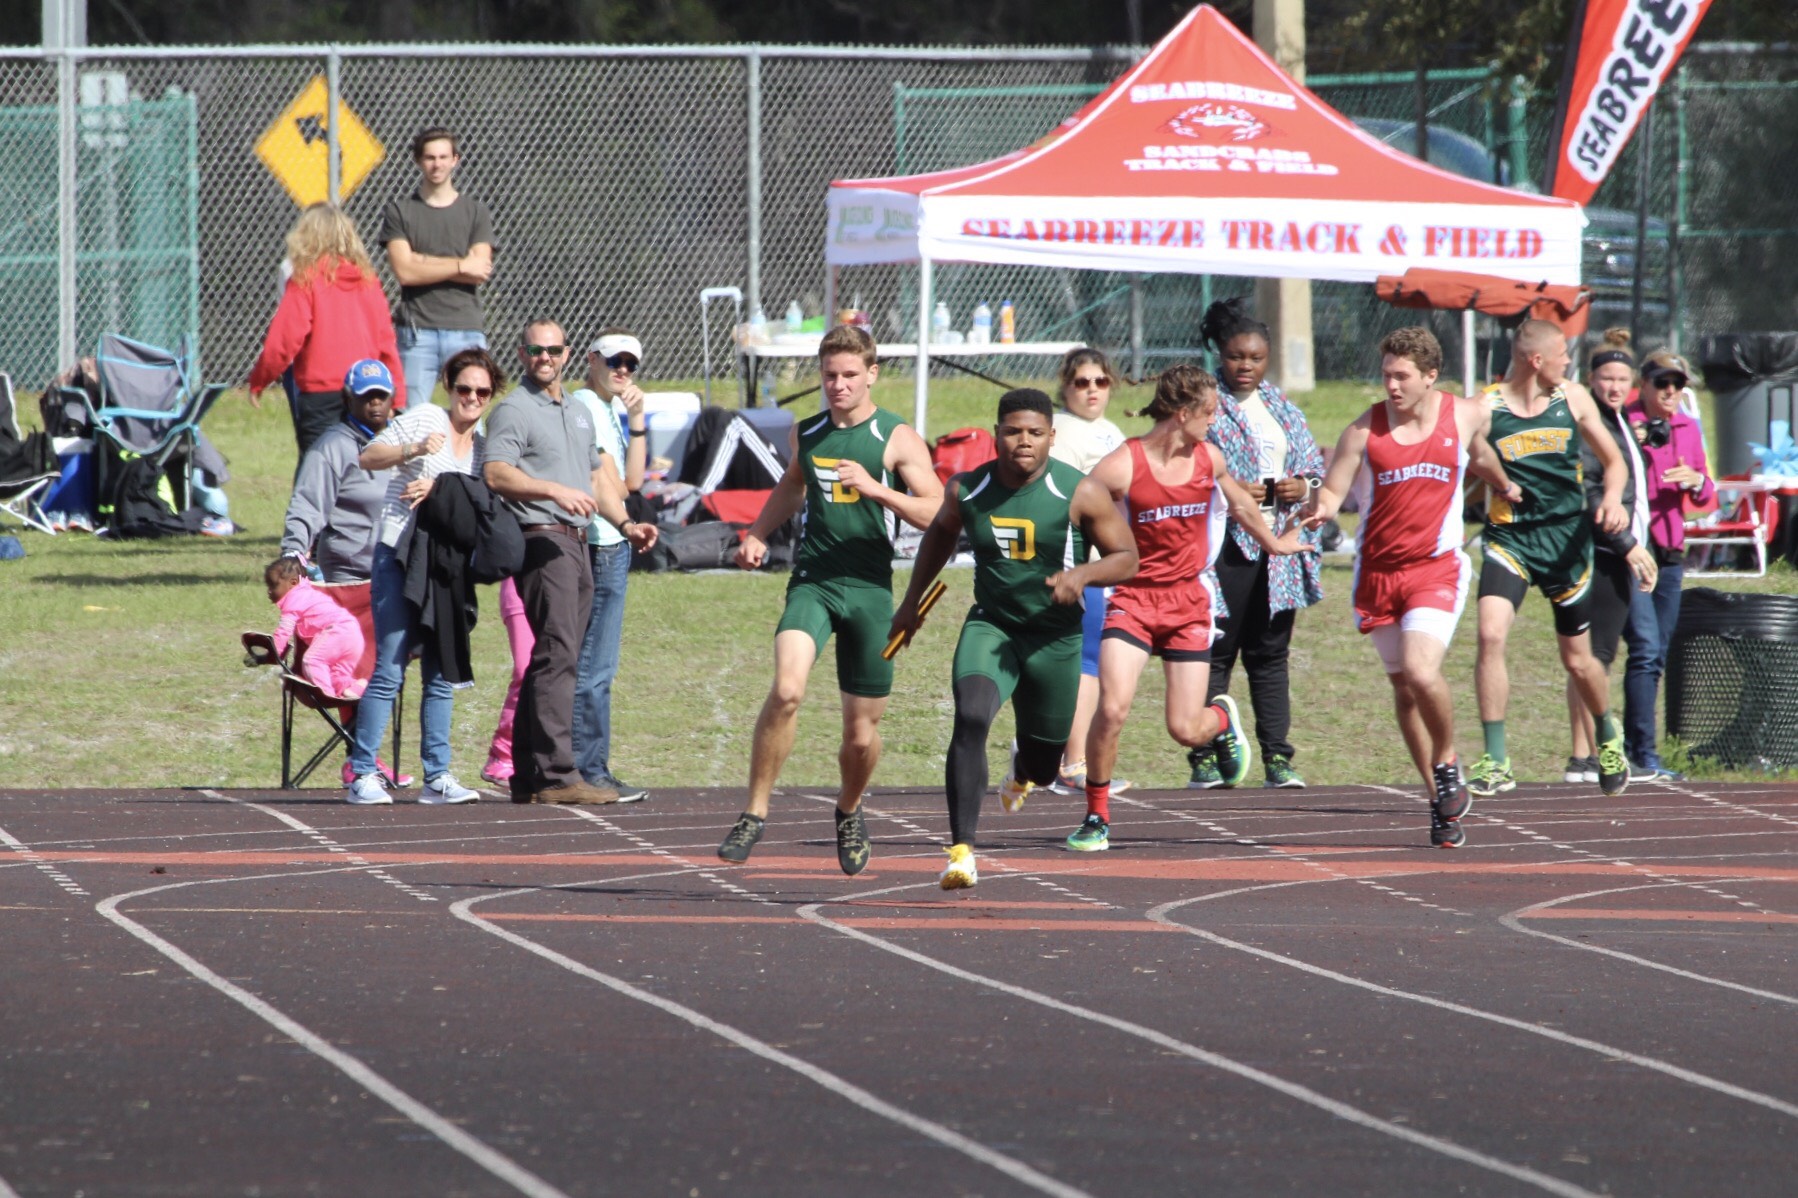 March 4th: DeLand Hosts the Big D Relay Track Meet!